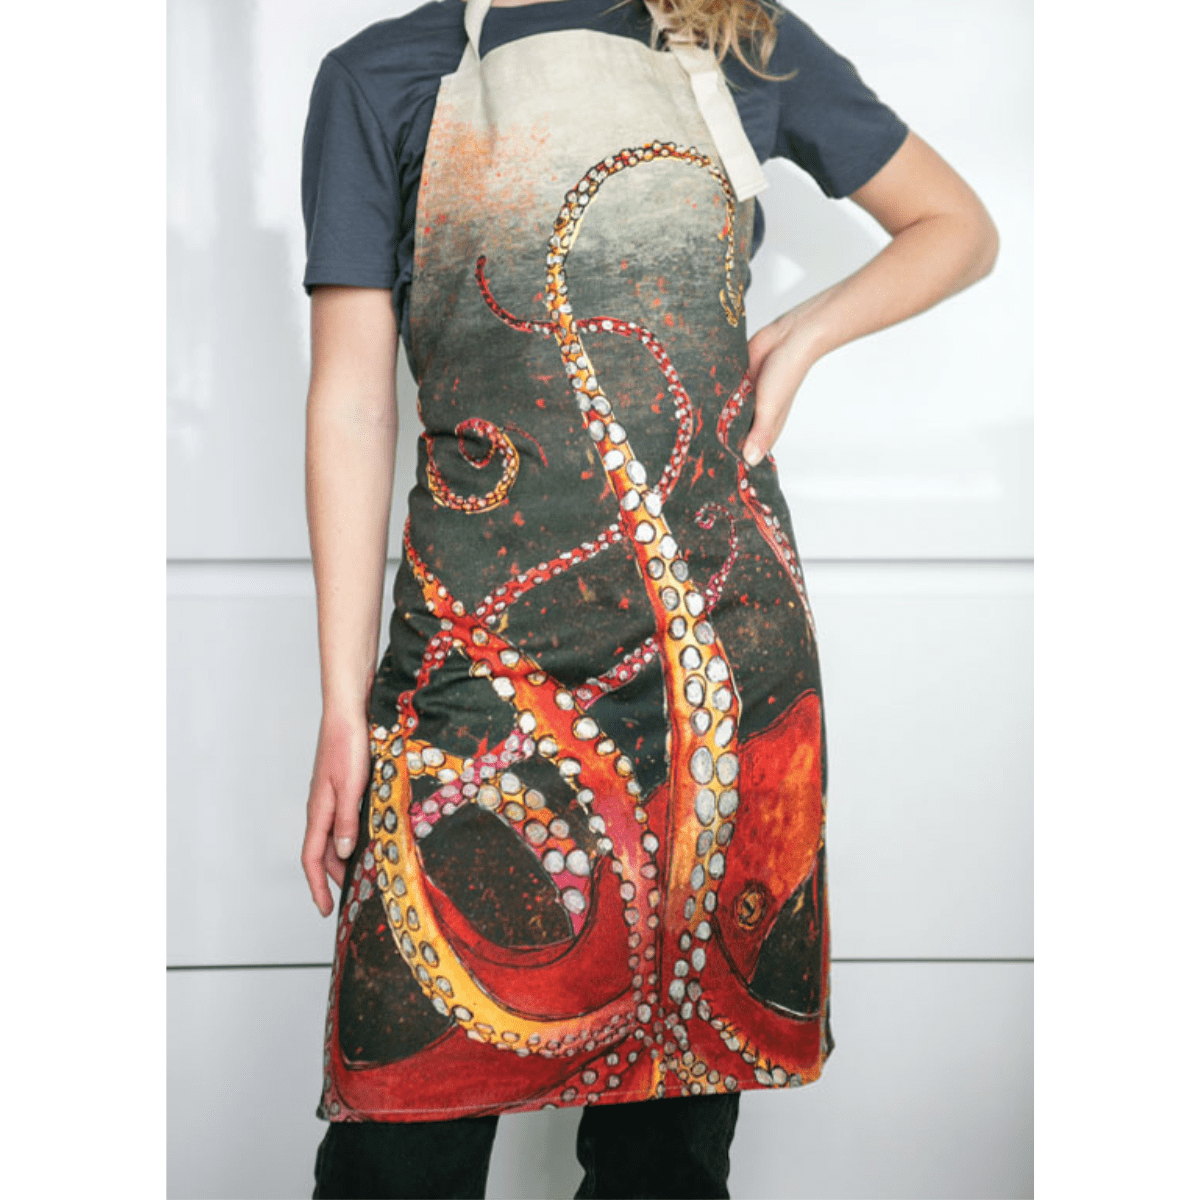 Apron - Octopus - Life of Riley